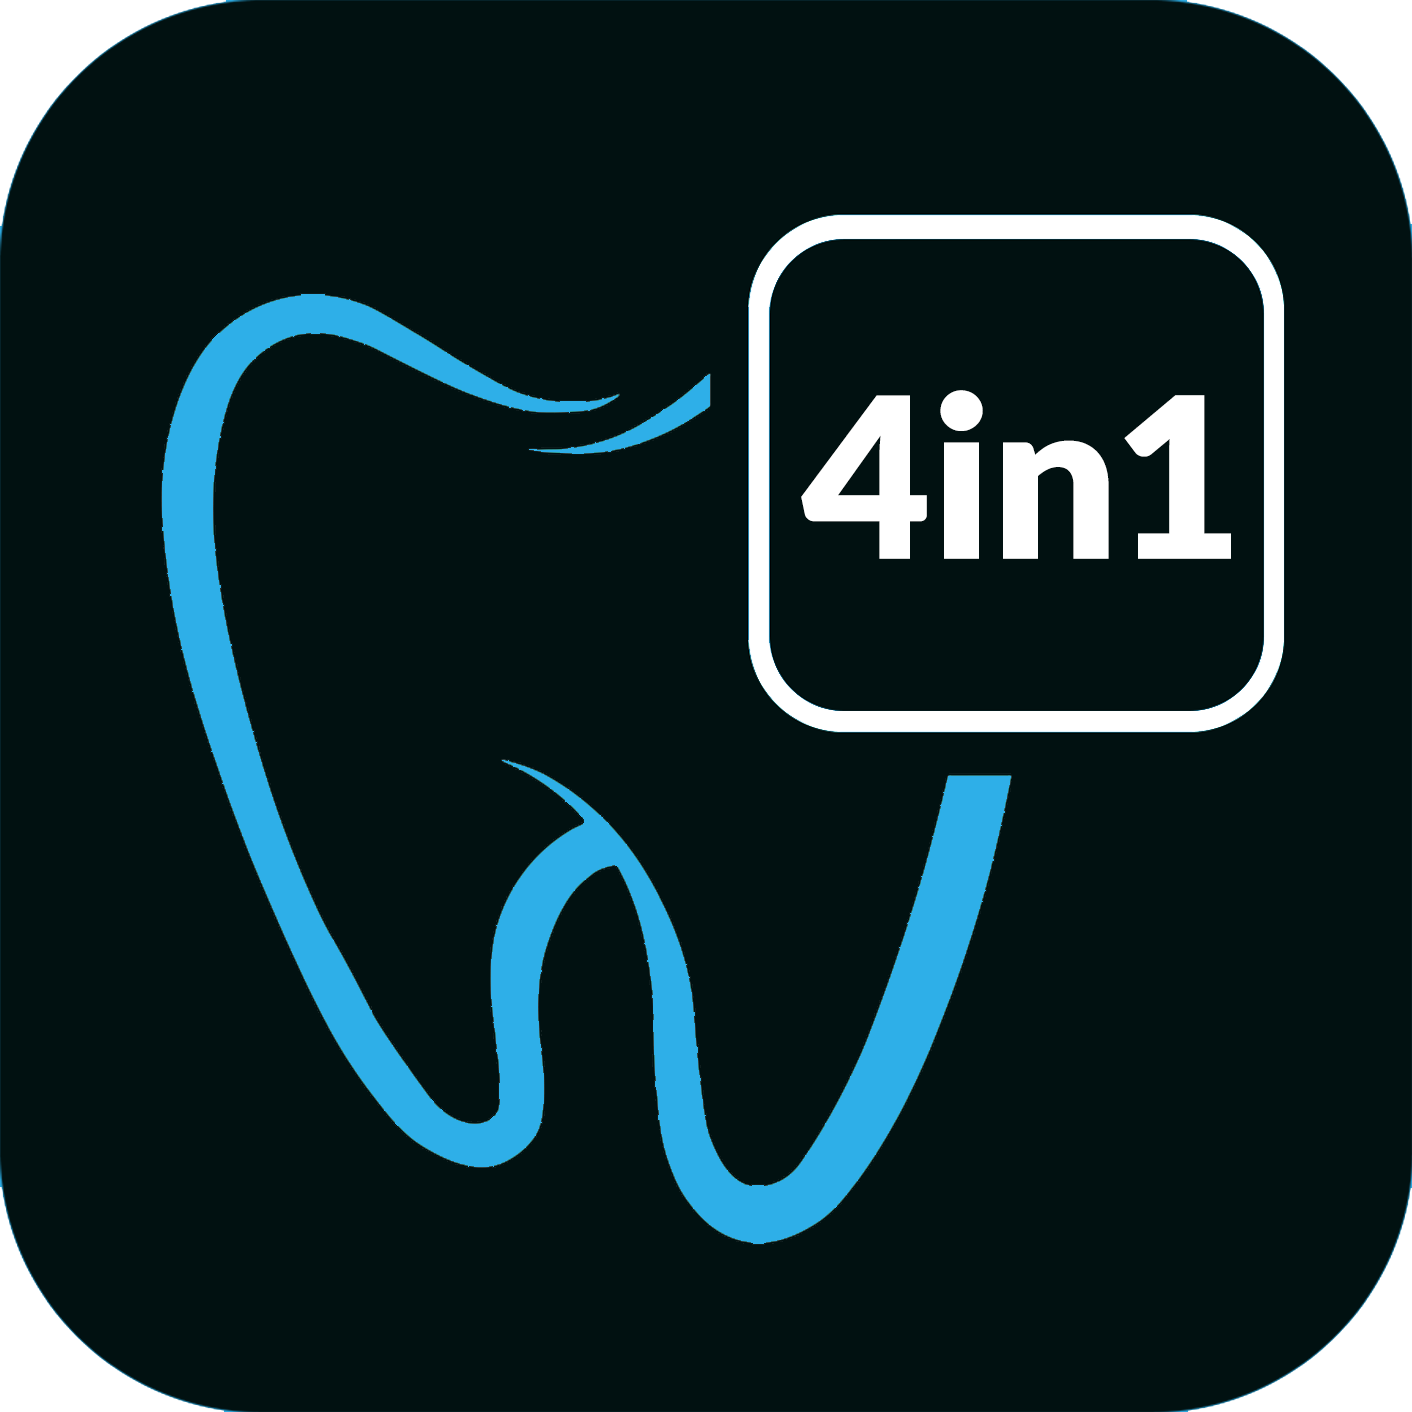 DentiCalc - The mobile application for Dental Professionals